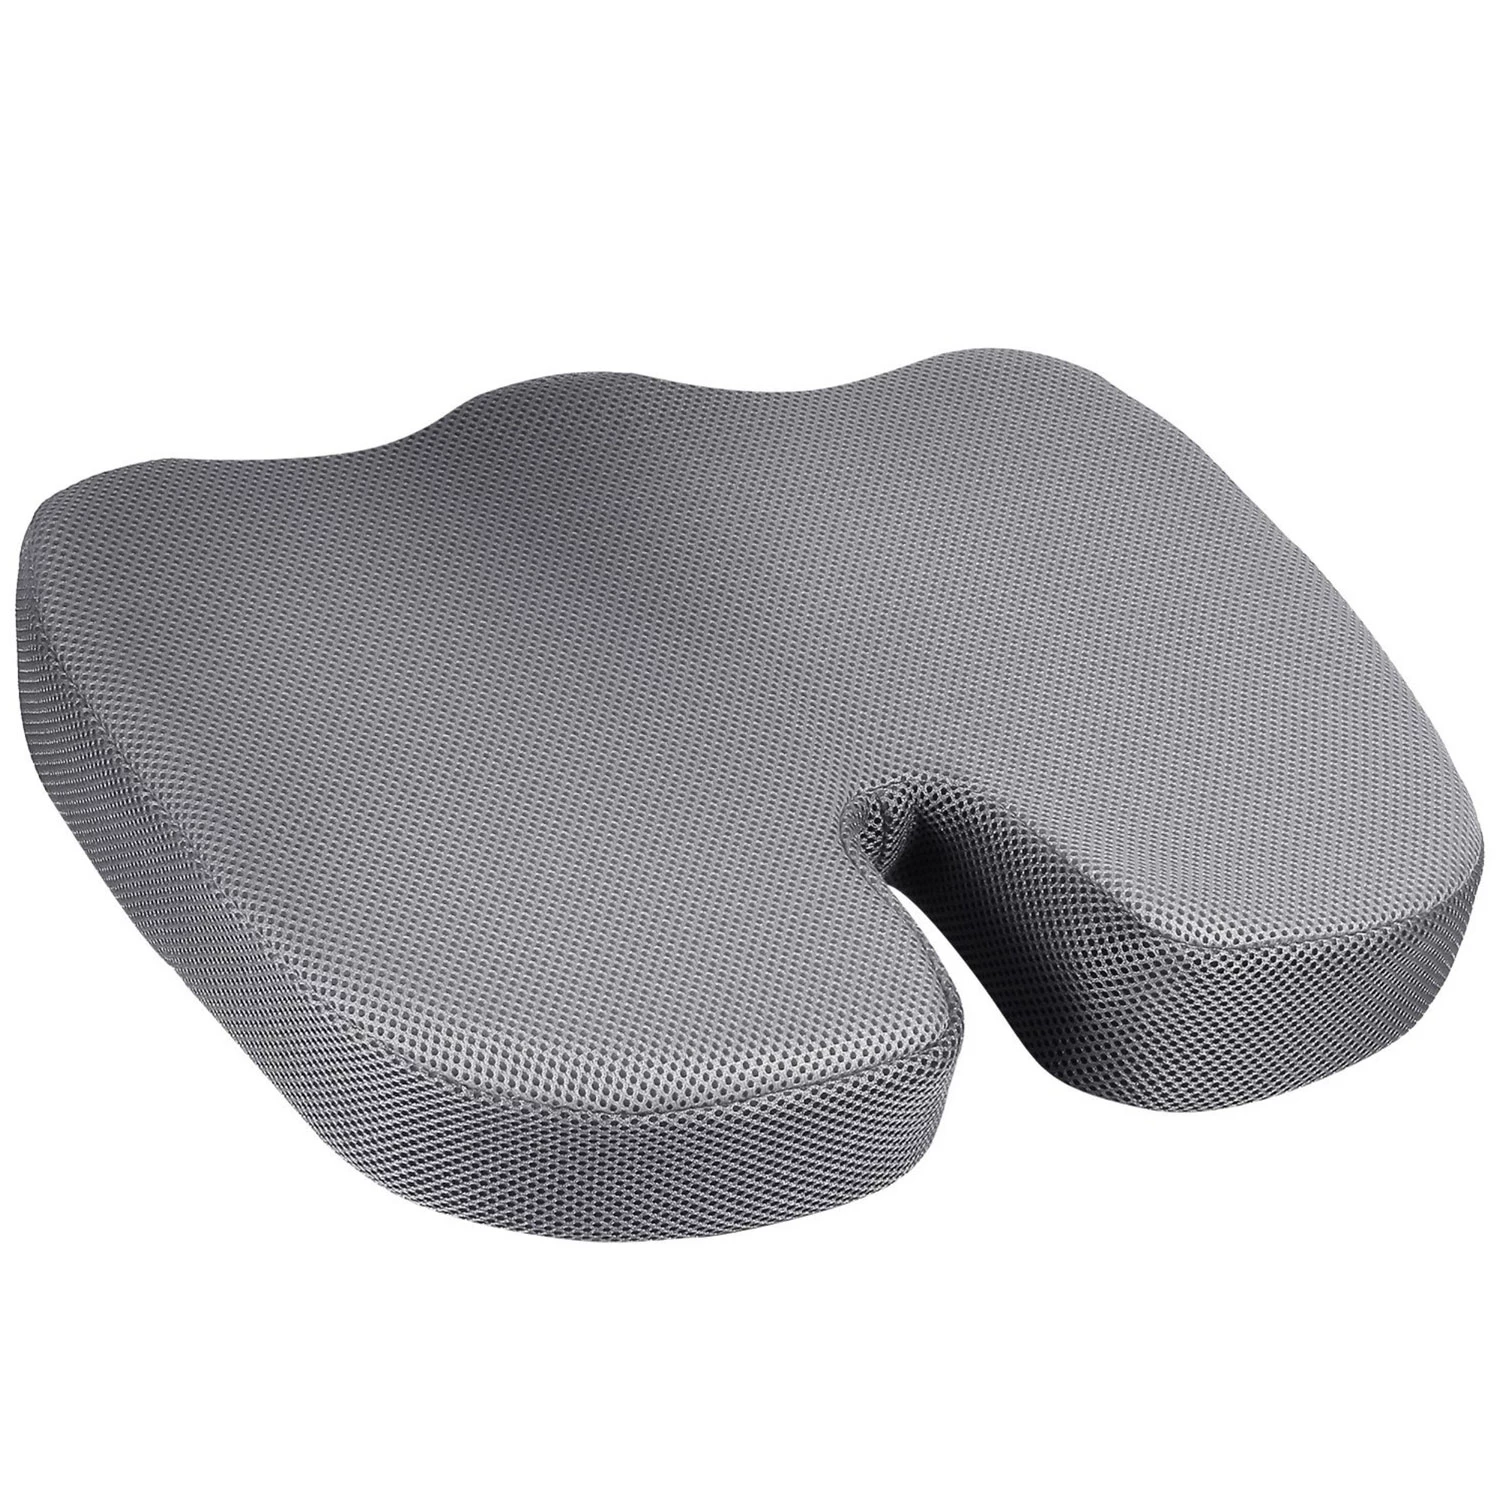 Orthopedic Memory Foam Seat Cushion for Office Car Seat - Tailbone And Hip Support